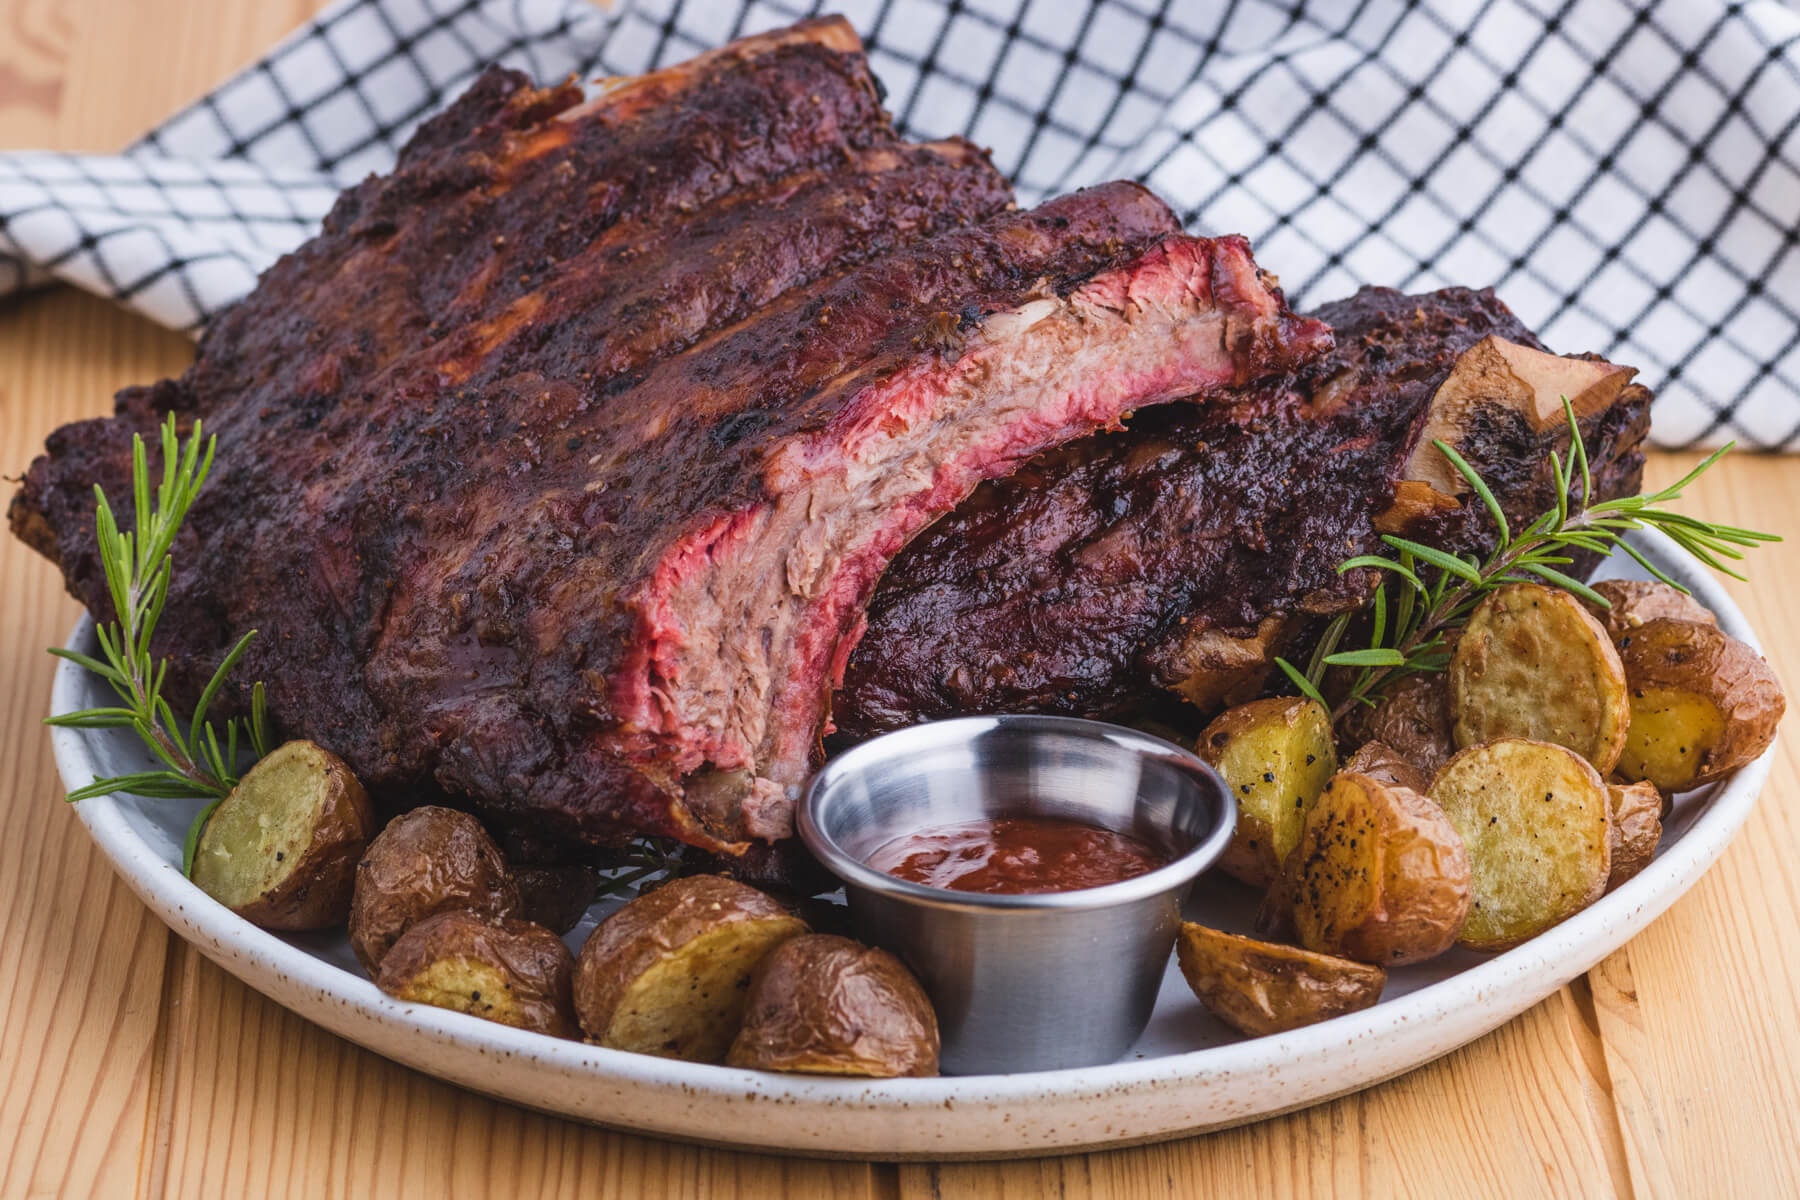 A platter holding a cut rack of cut smoked beef ribs, roasted potatoes, and barbecue sauce.